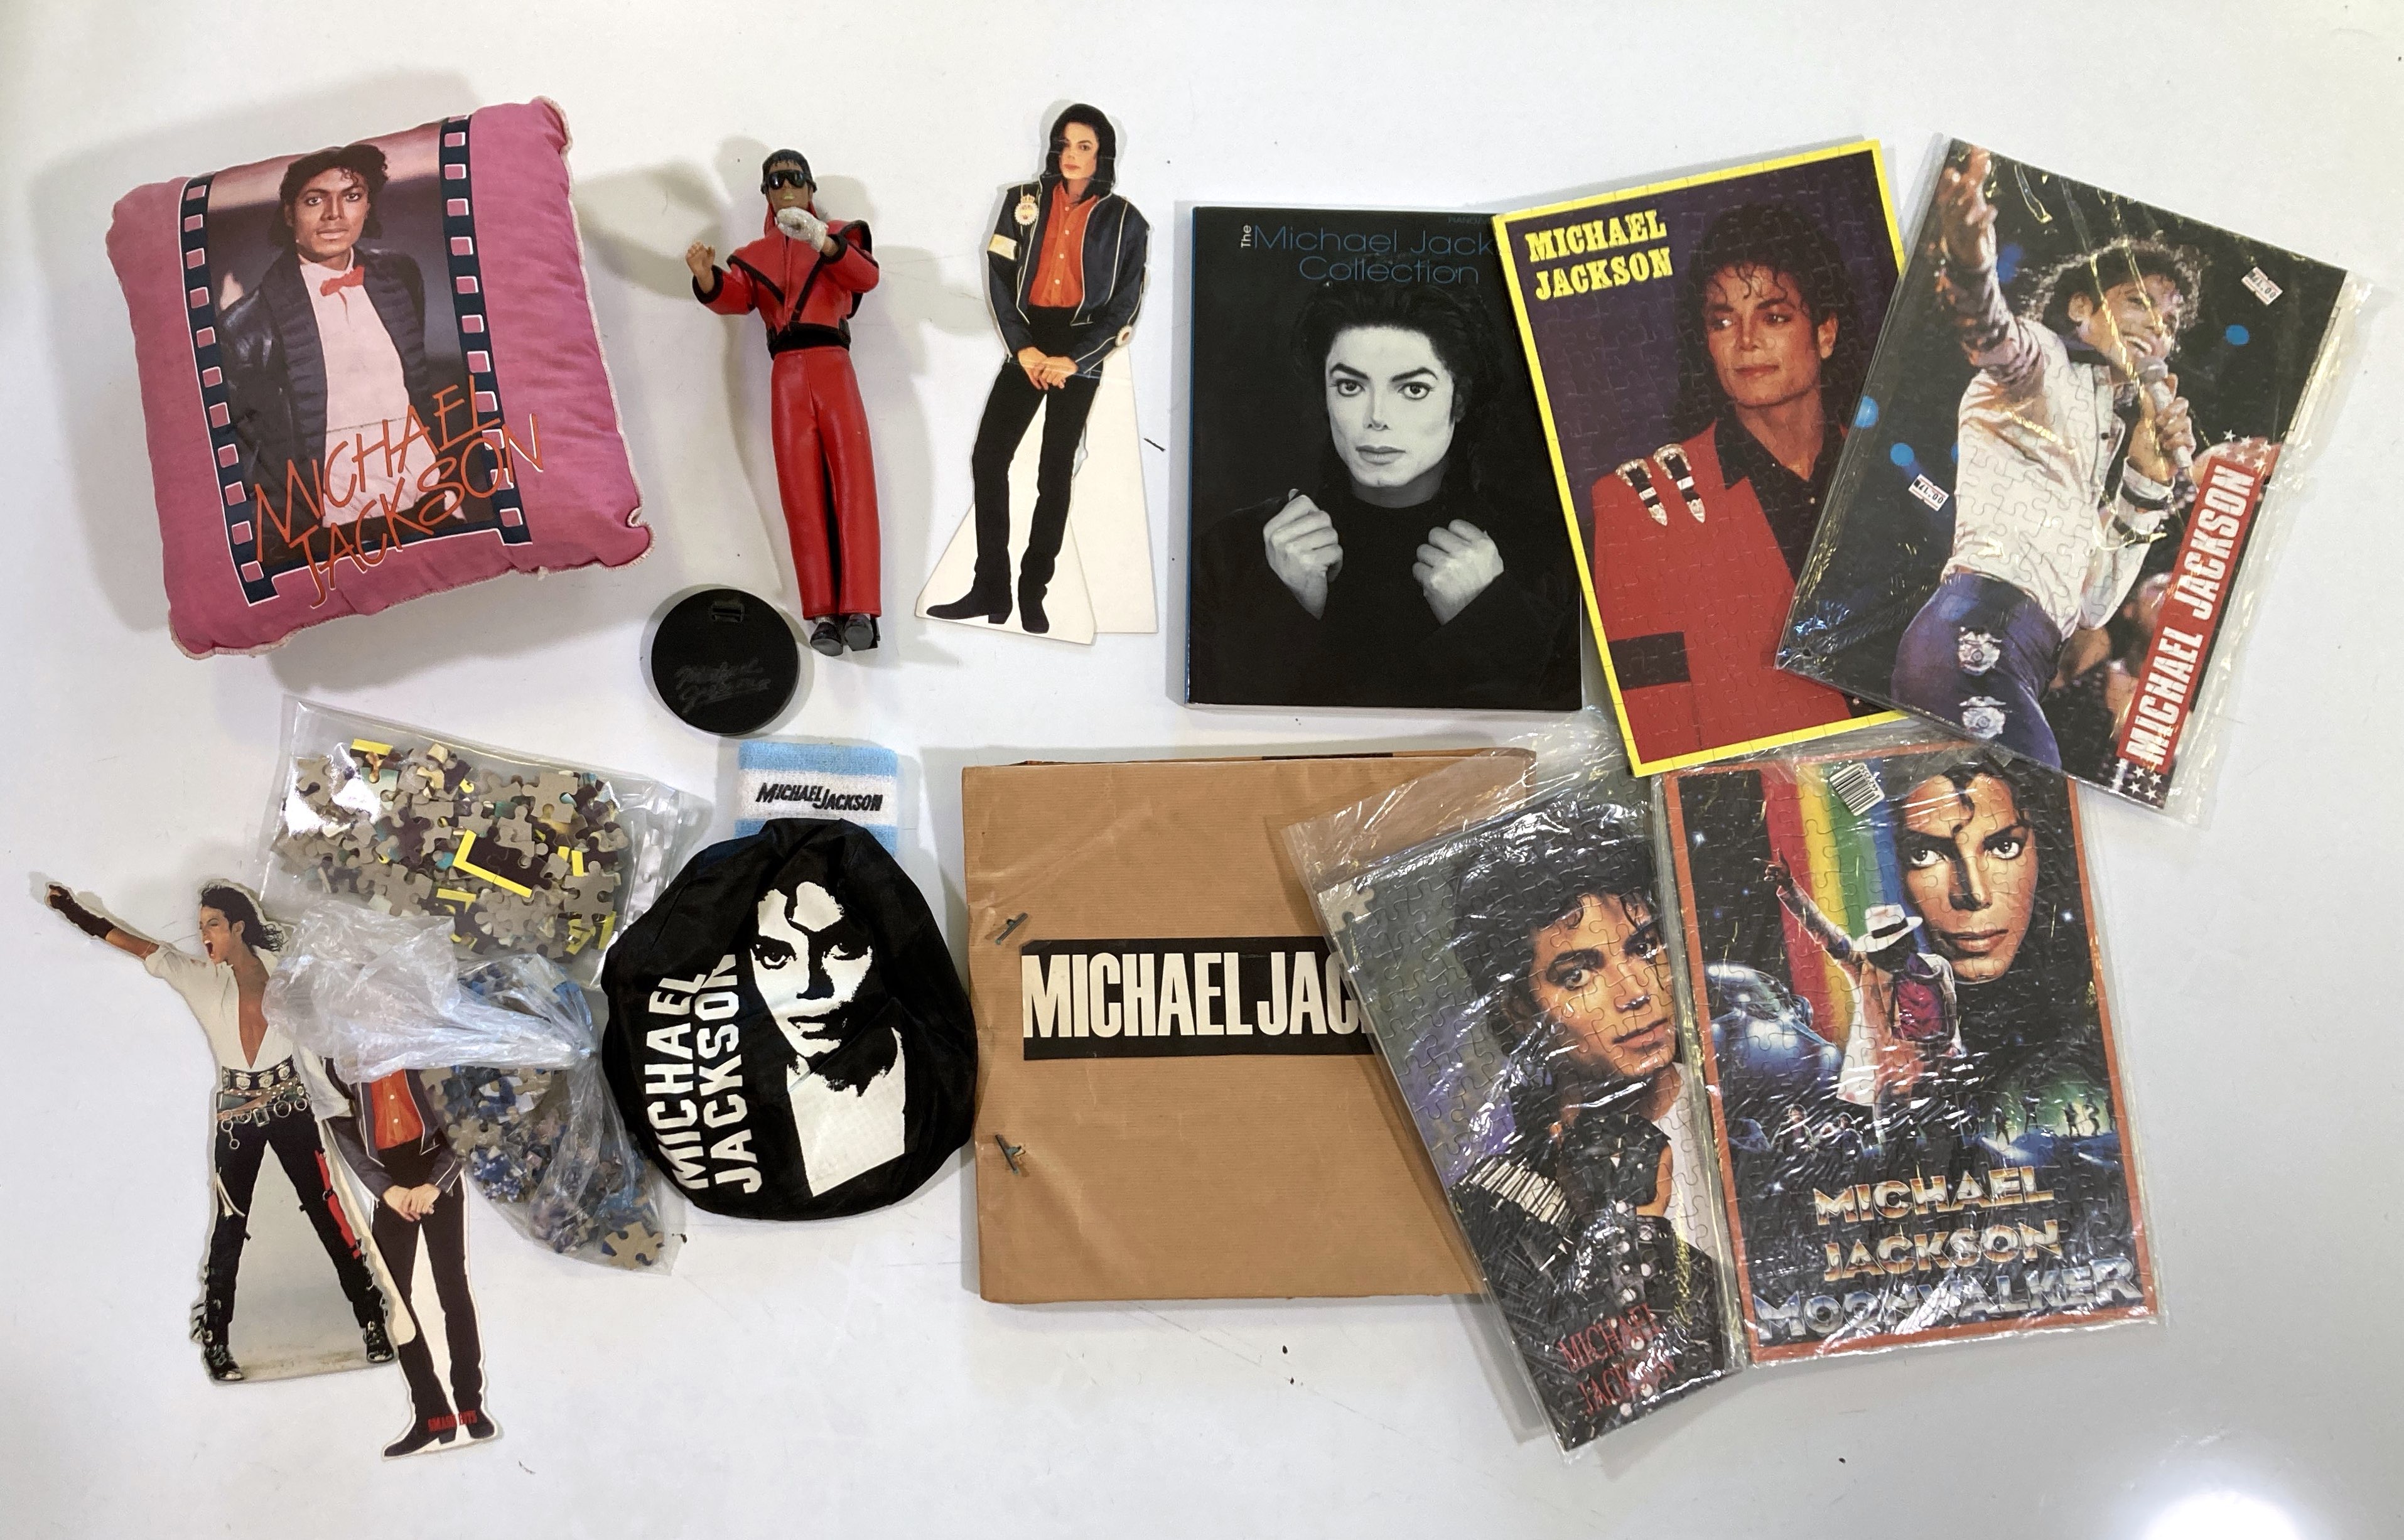 Jackson michael memorabilia worth goes dailymail unreleased including his tapes recording session last playback device five personal collection